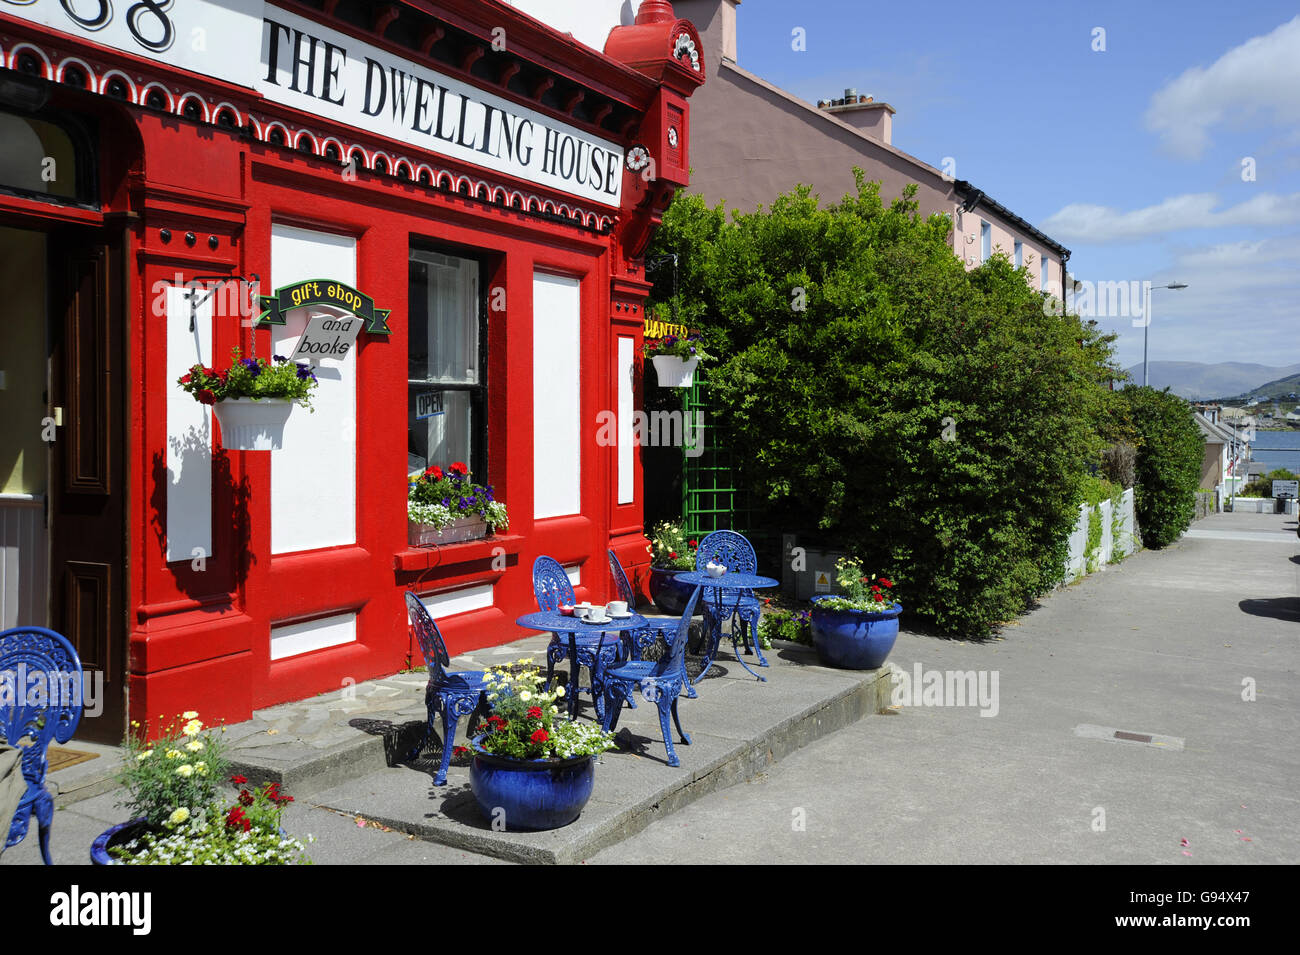 Cafe 'The Dwelling House', Knights Town, Valentia, Iveragh Peninsula, Ring of Kerry, County Kerry, Ireland Stock Photo